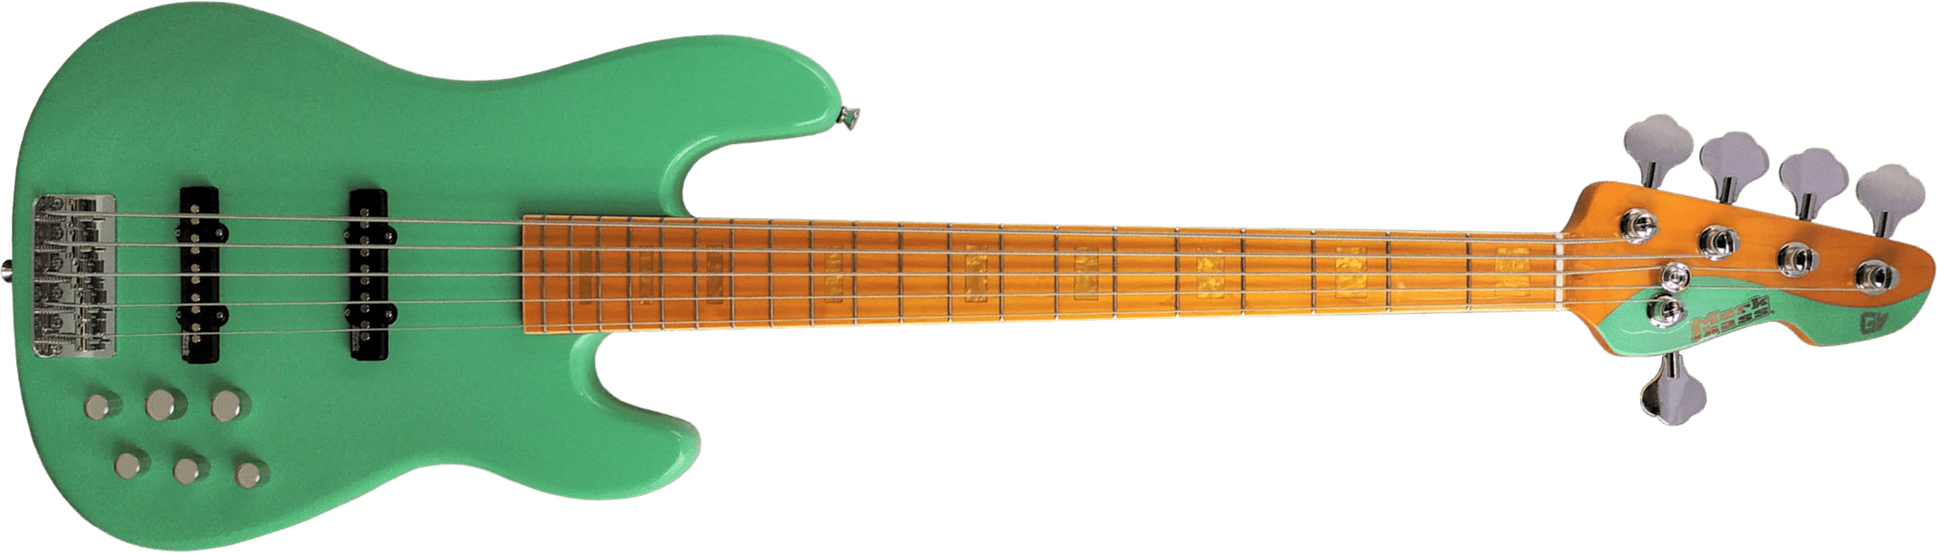 Markbass Mb Gv 5 Gloxy Val Cr Mp 5c Active Mn - Surf Green - Solidbody E-bass - Main picture